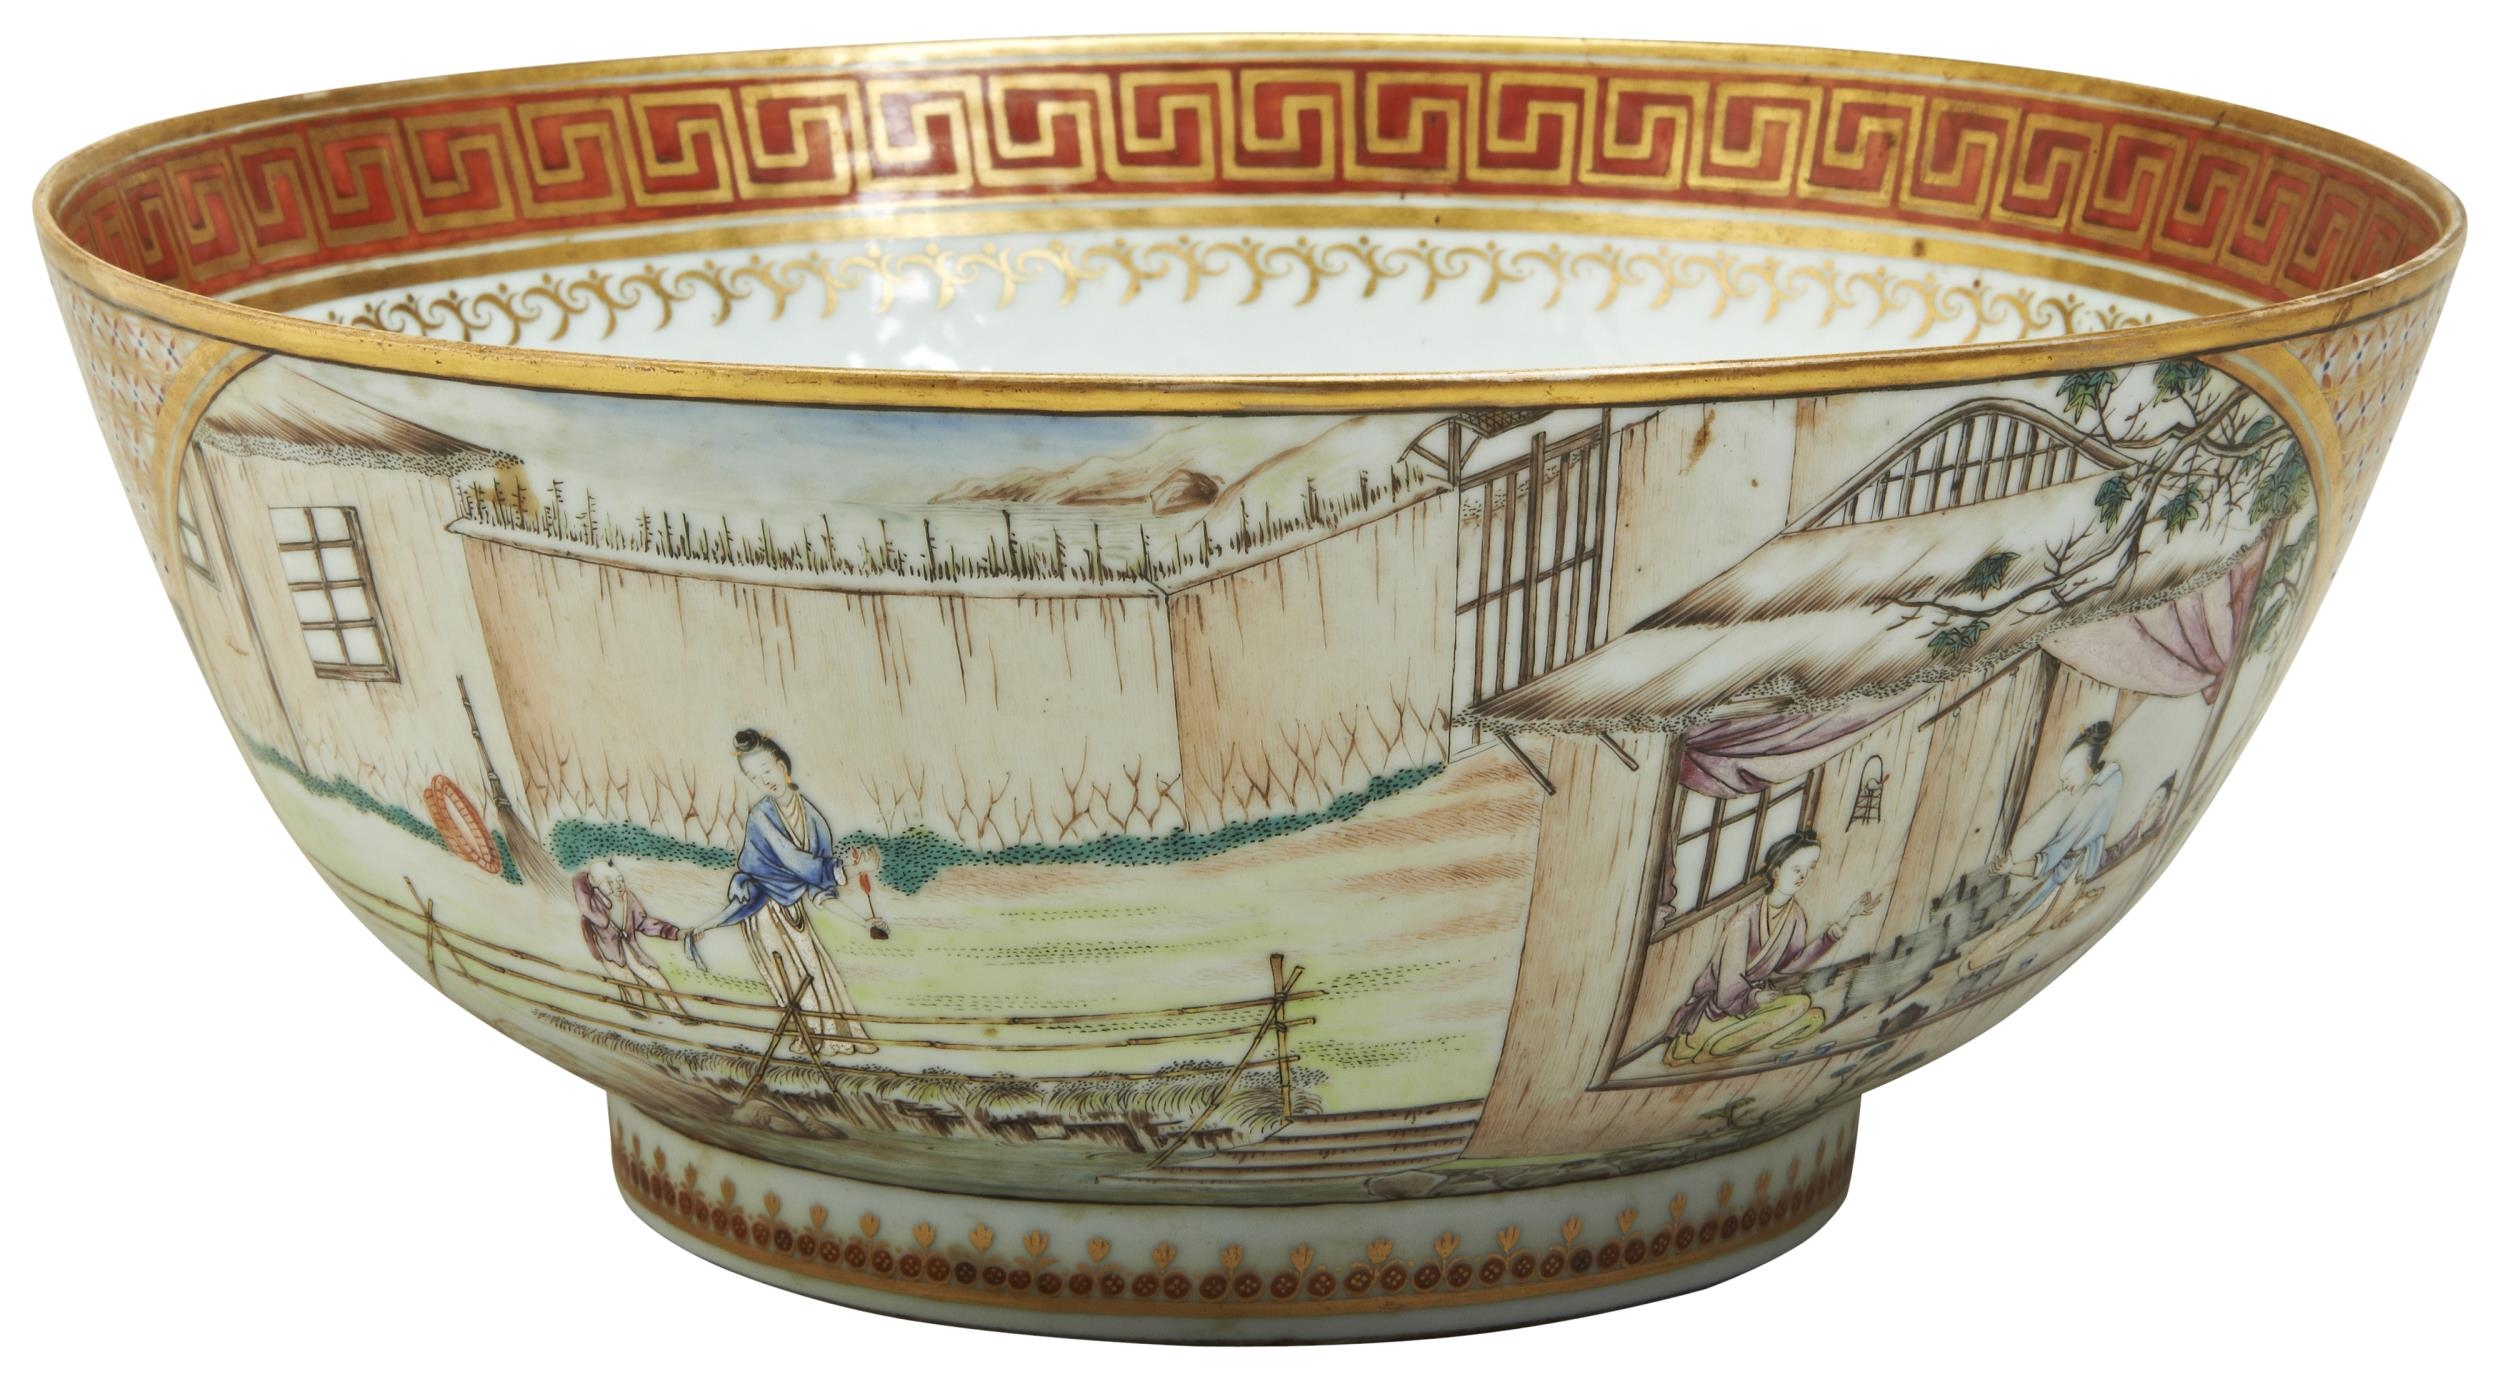 AN EXTREMELY RARE CHINESE EXPORT 'RICE PRODUCTION & SILK PRODUCTION' BOWL QIANLONG PERIOD (1736-